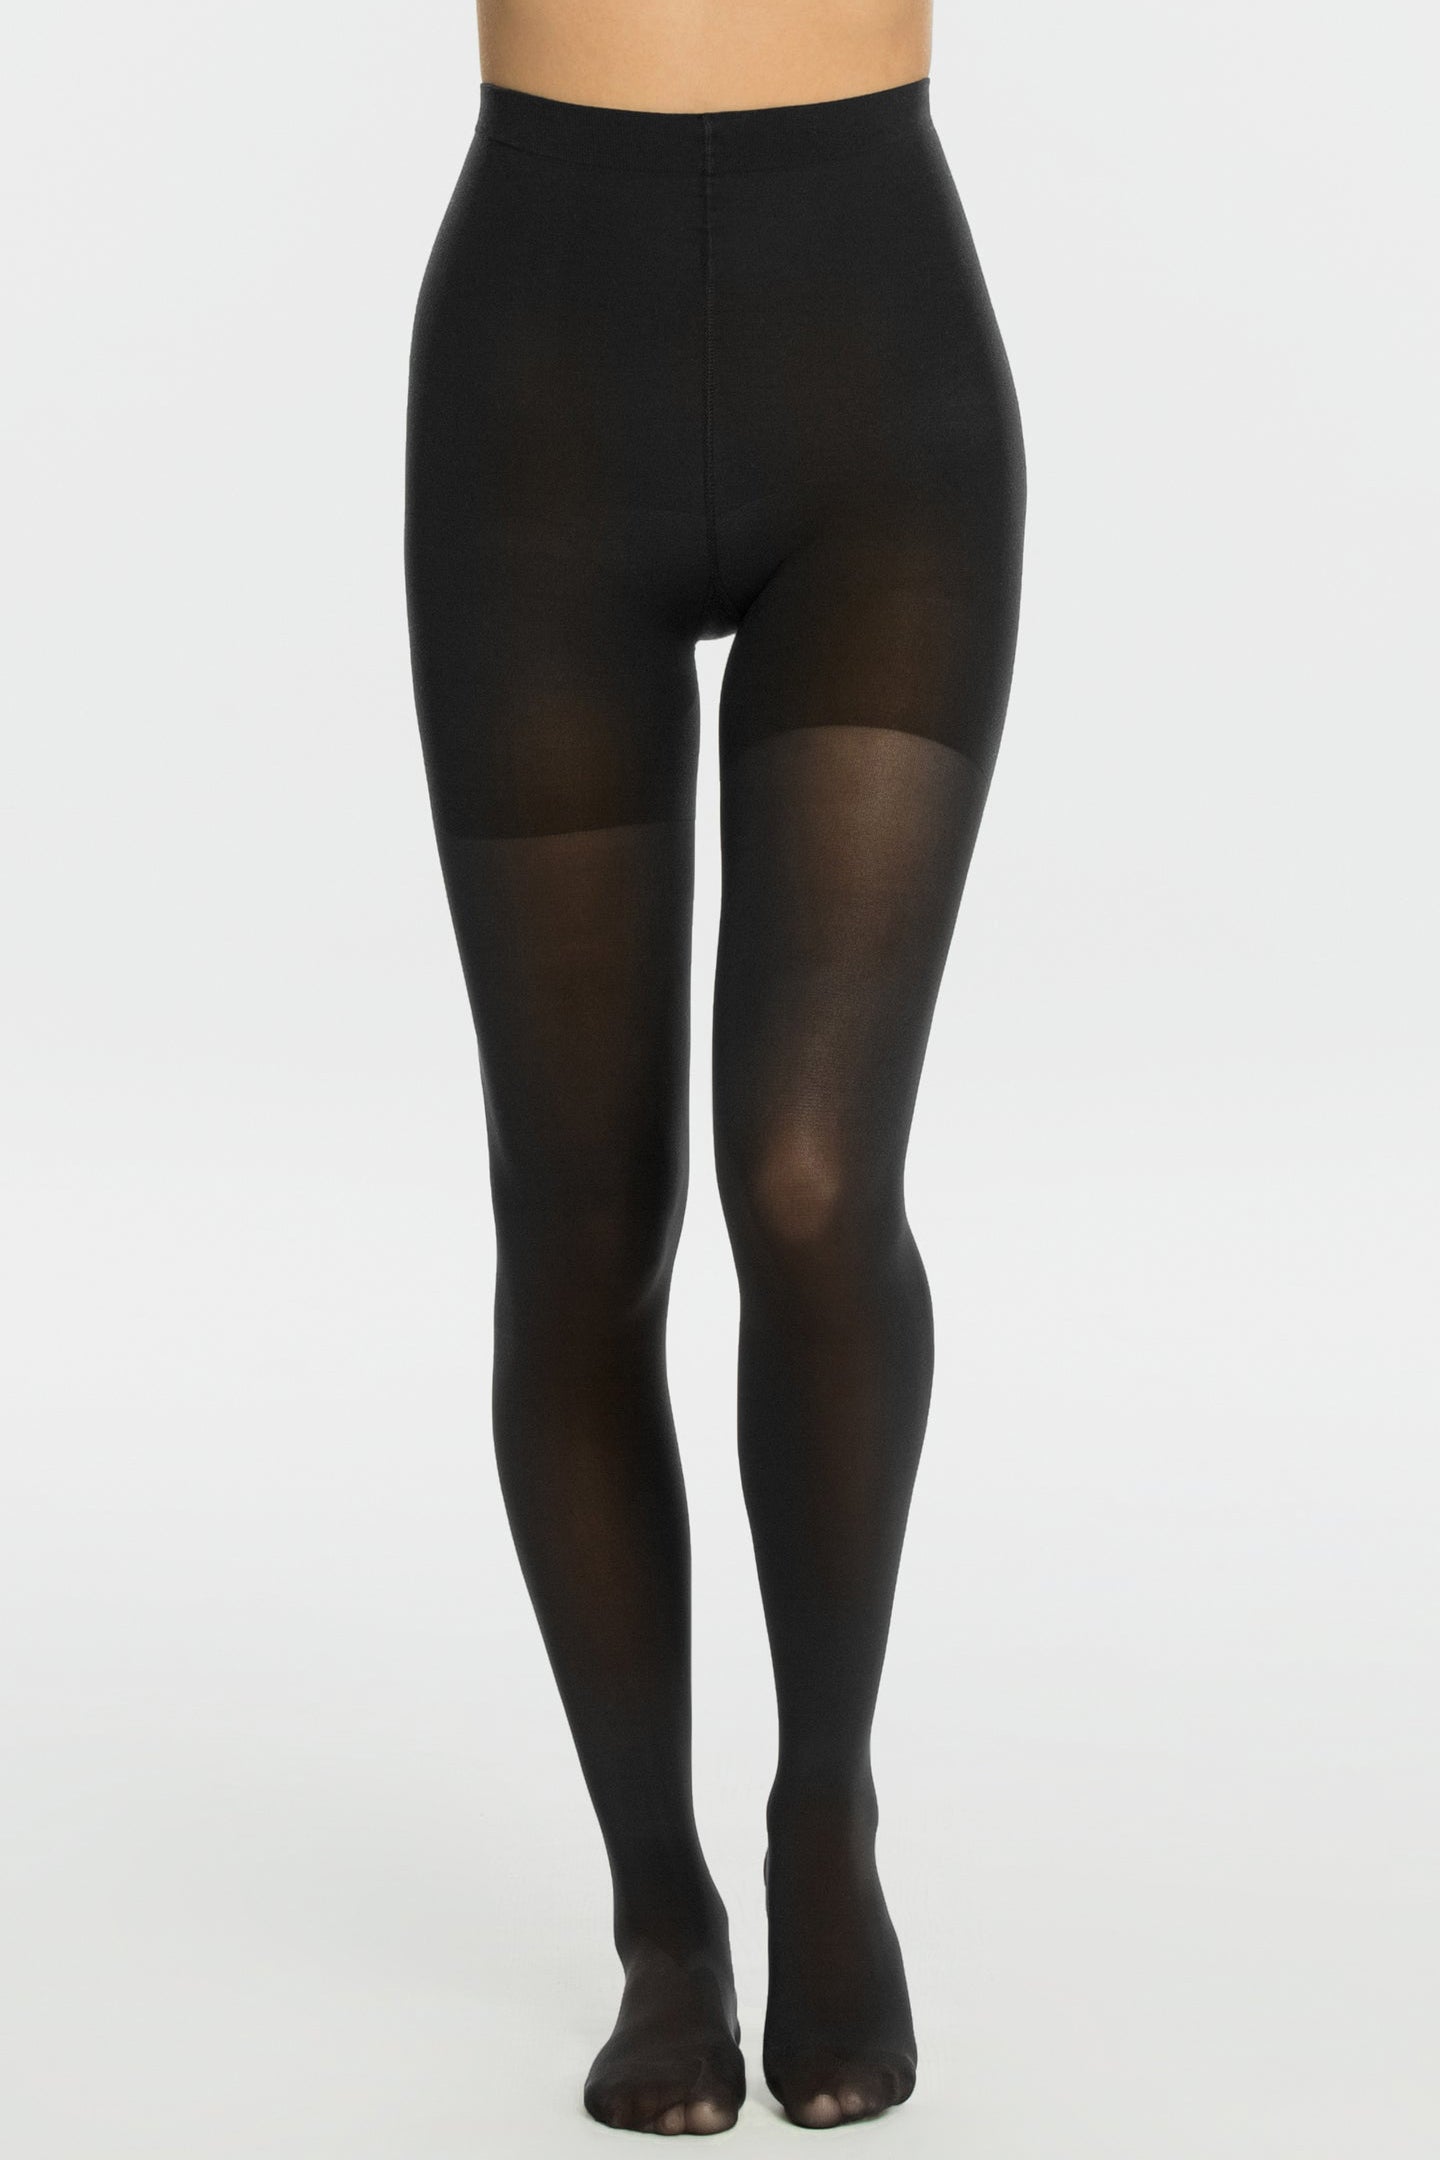 Spanx Tight-End Tights